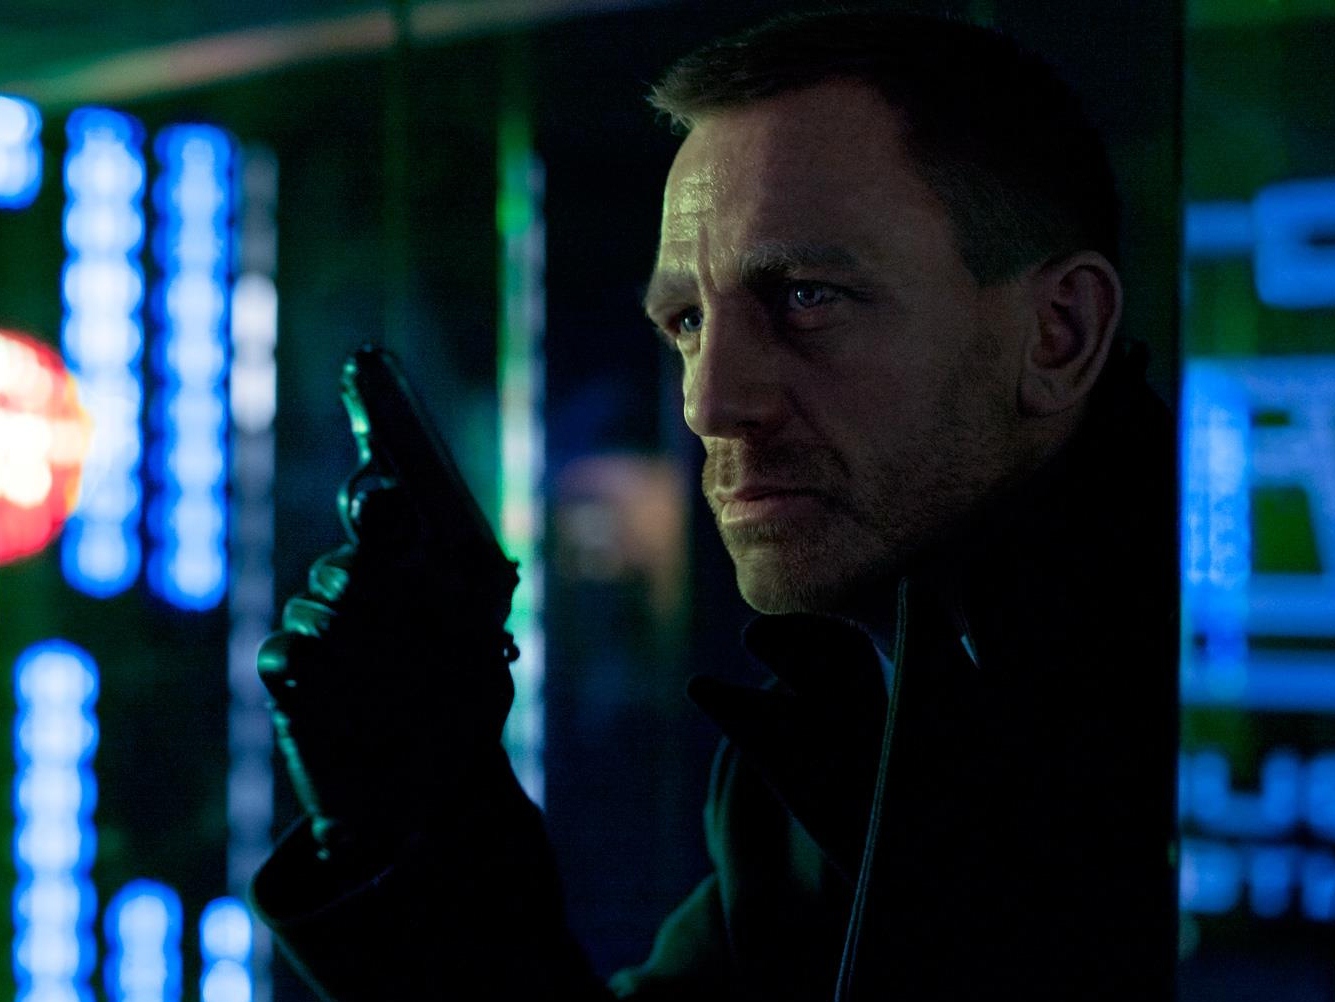 Trailer Talk: Bond is Back in 'Skyfall,' but Who's the New Blond?